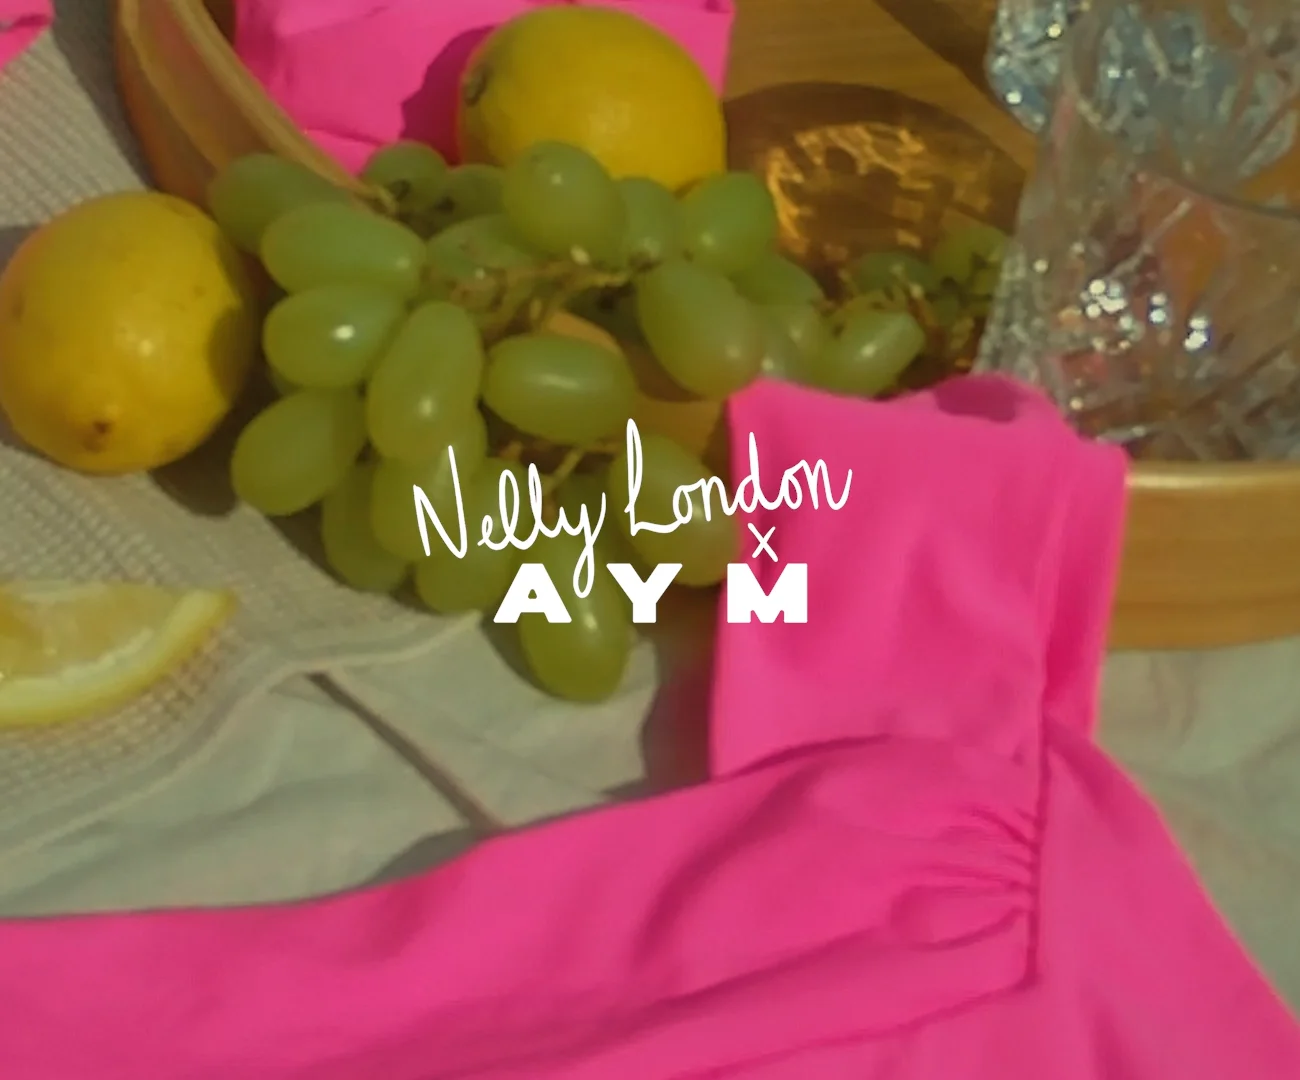 Nelly London